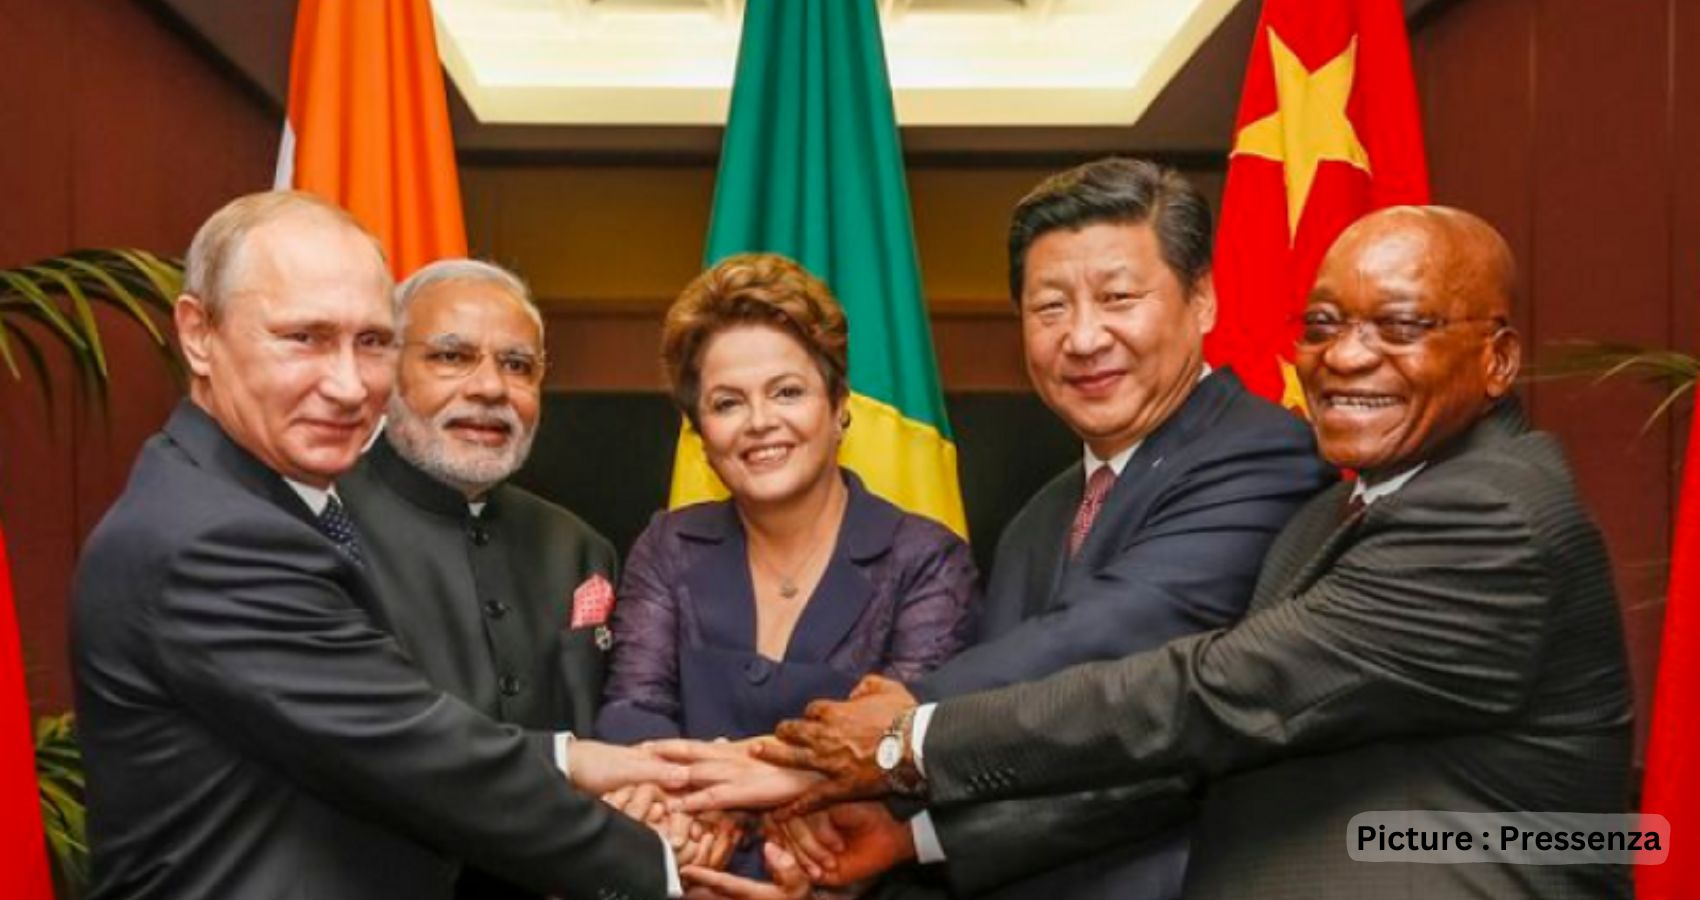 New Leaders At World Bank And BRICS Bank Have Different Outlooks